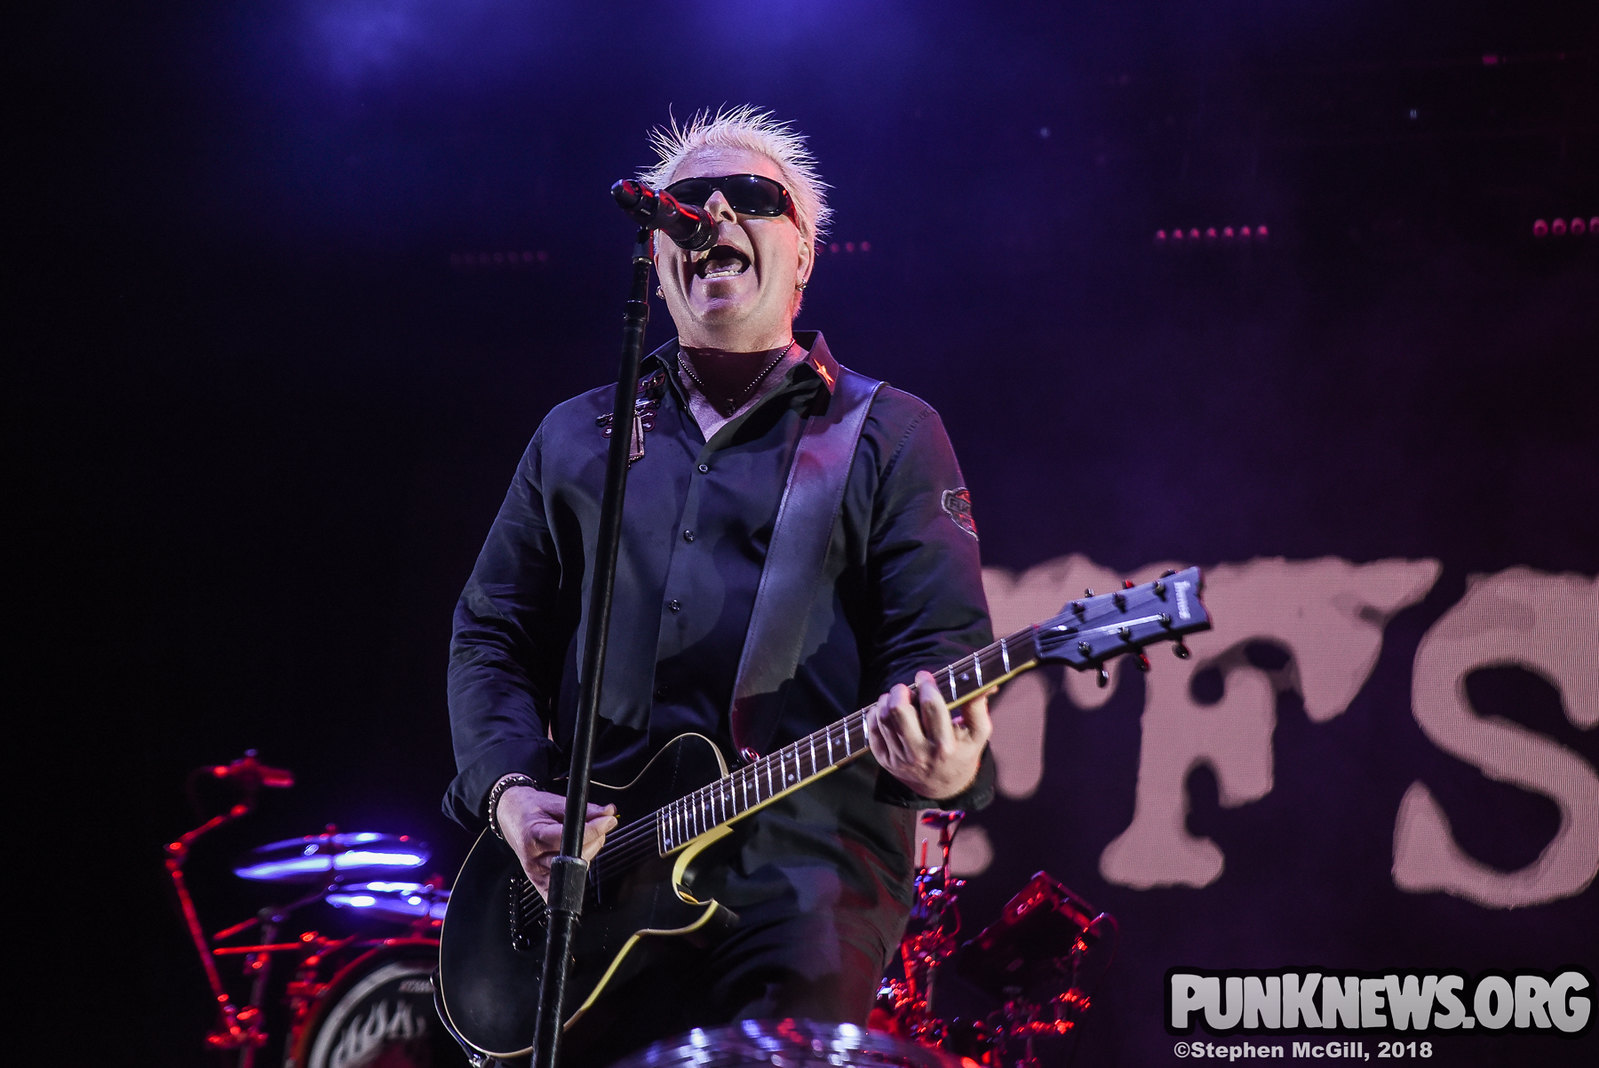 The Offspring at Budweiser Stage, 08/28